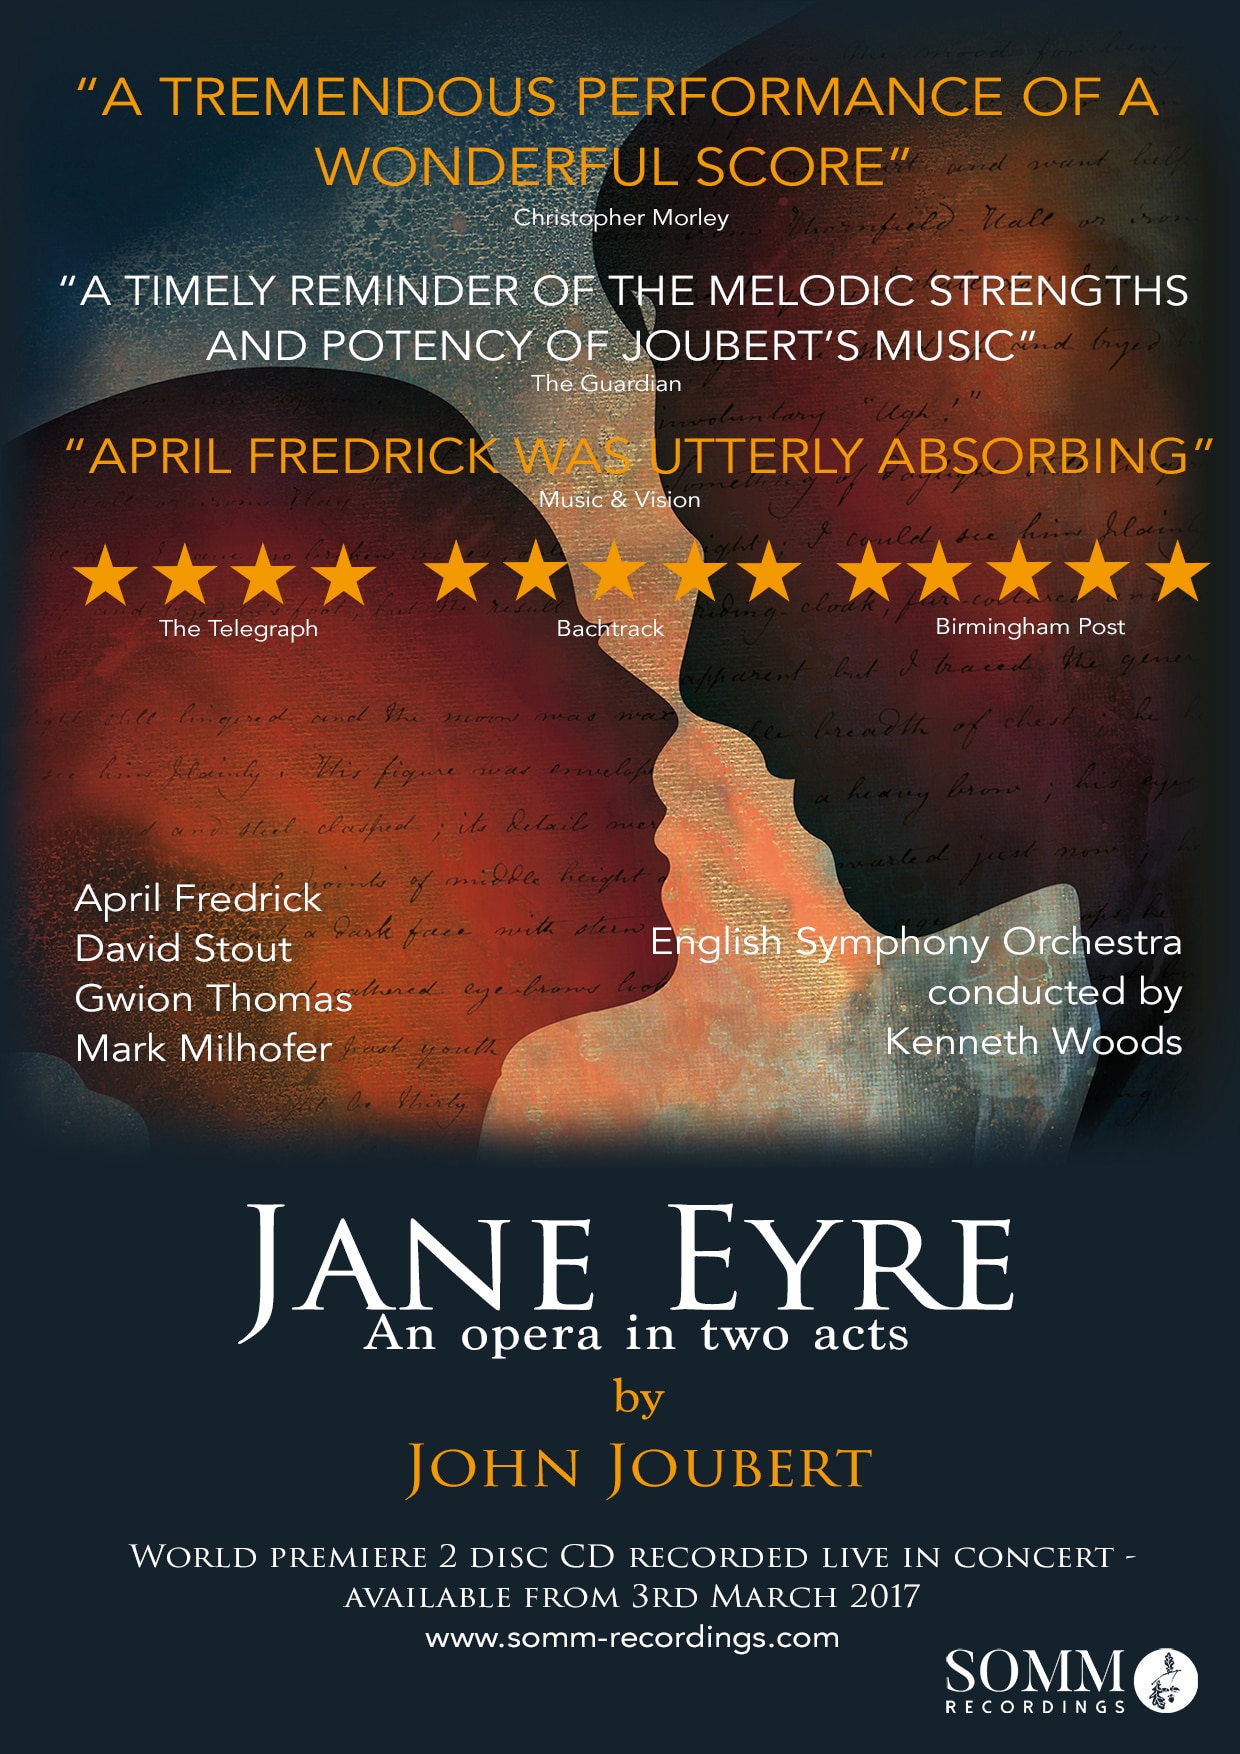 Five Stars for Jane Eyre at The Classical Ear